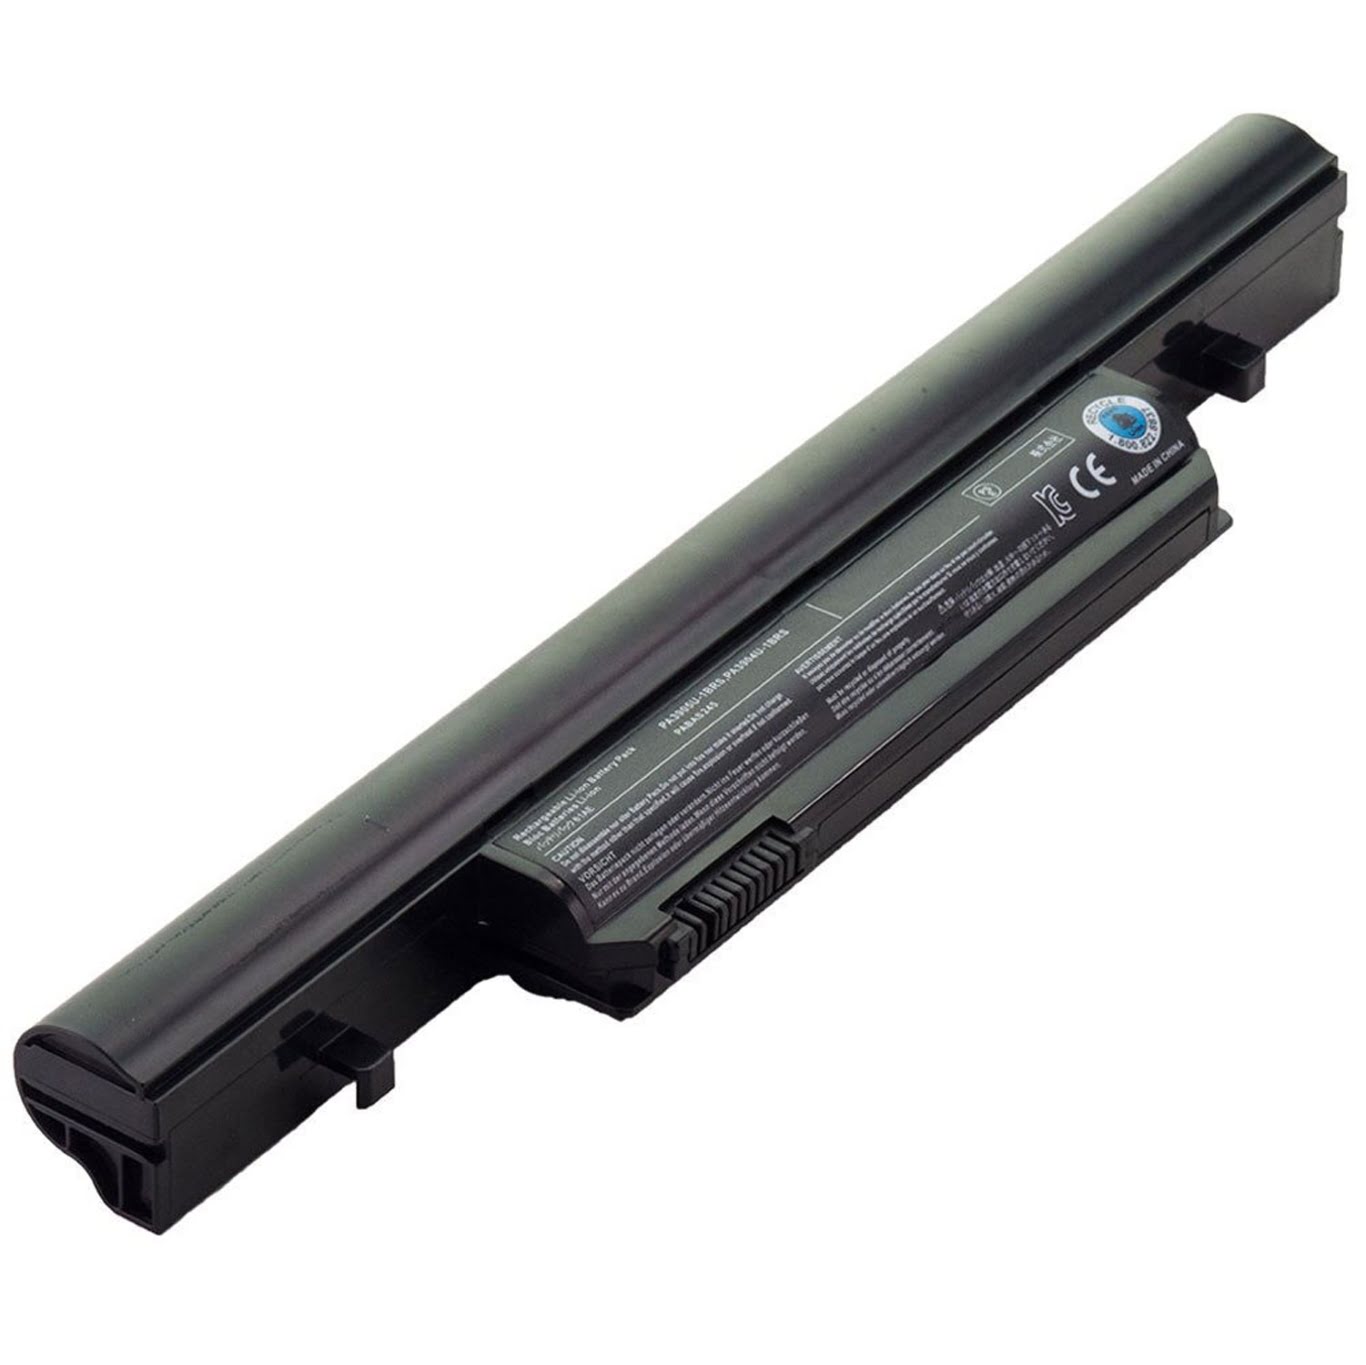 PA3904U-1BRS, PA3905U-1BRS replacement Laptop Battery for Toshiba Dynabook R751, Dynabook R752, 6 cells, 11.1V, 4400mAh